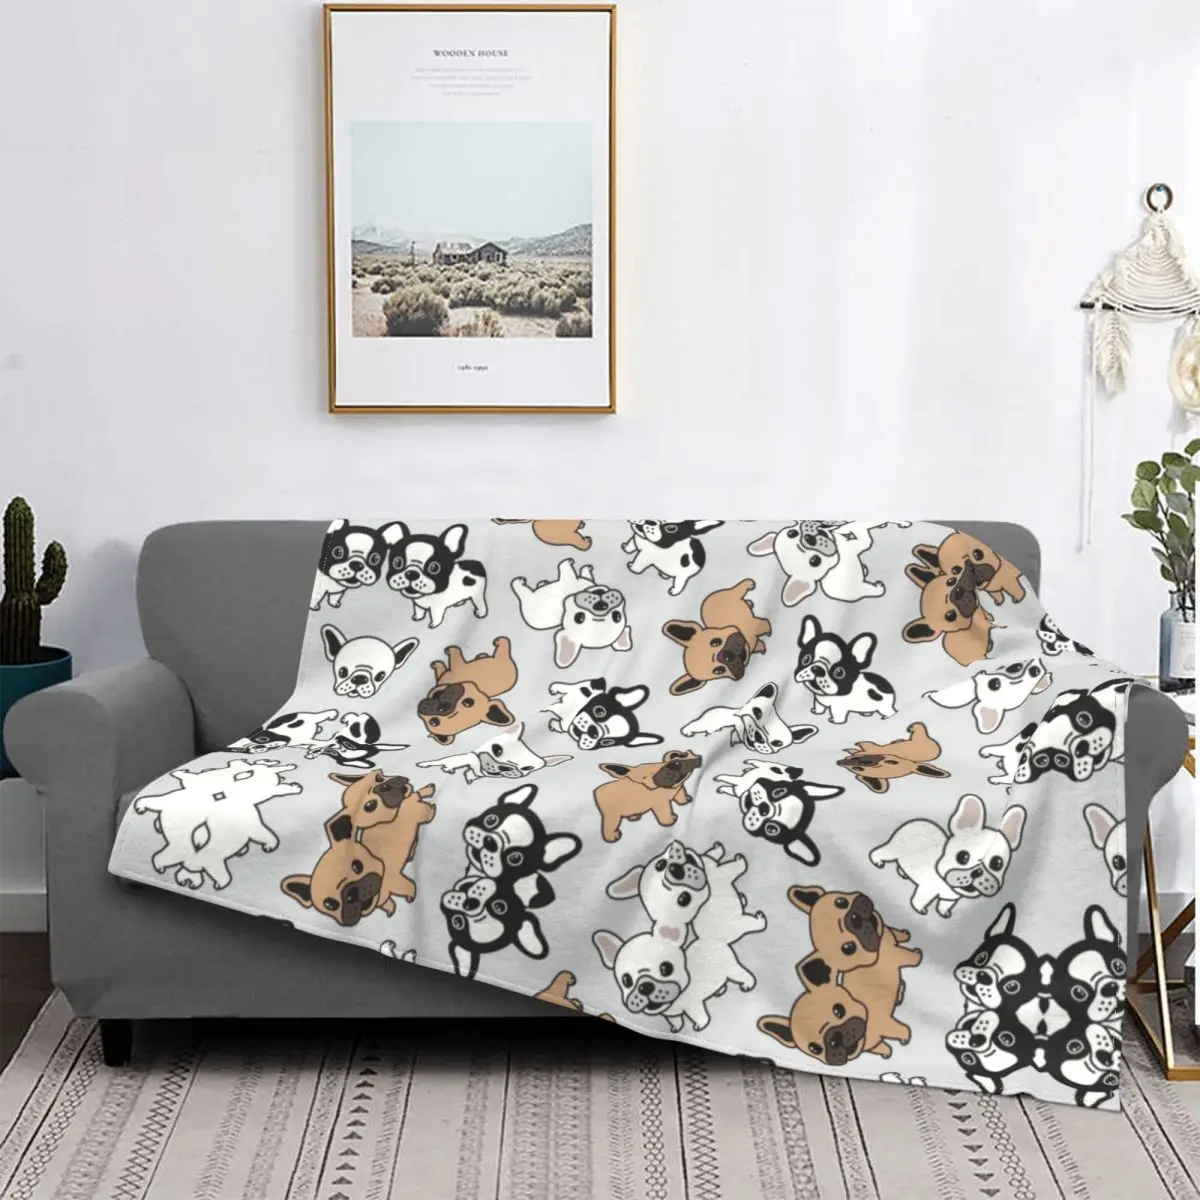 

Anatomy Of A French Bulldog Blanket for Office Bed Sofa Bedspreads 3D Print Soft Flannel Fleece Frenchie Dog Lover Throw Blanket